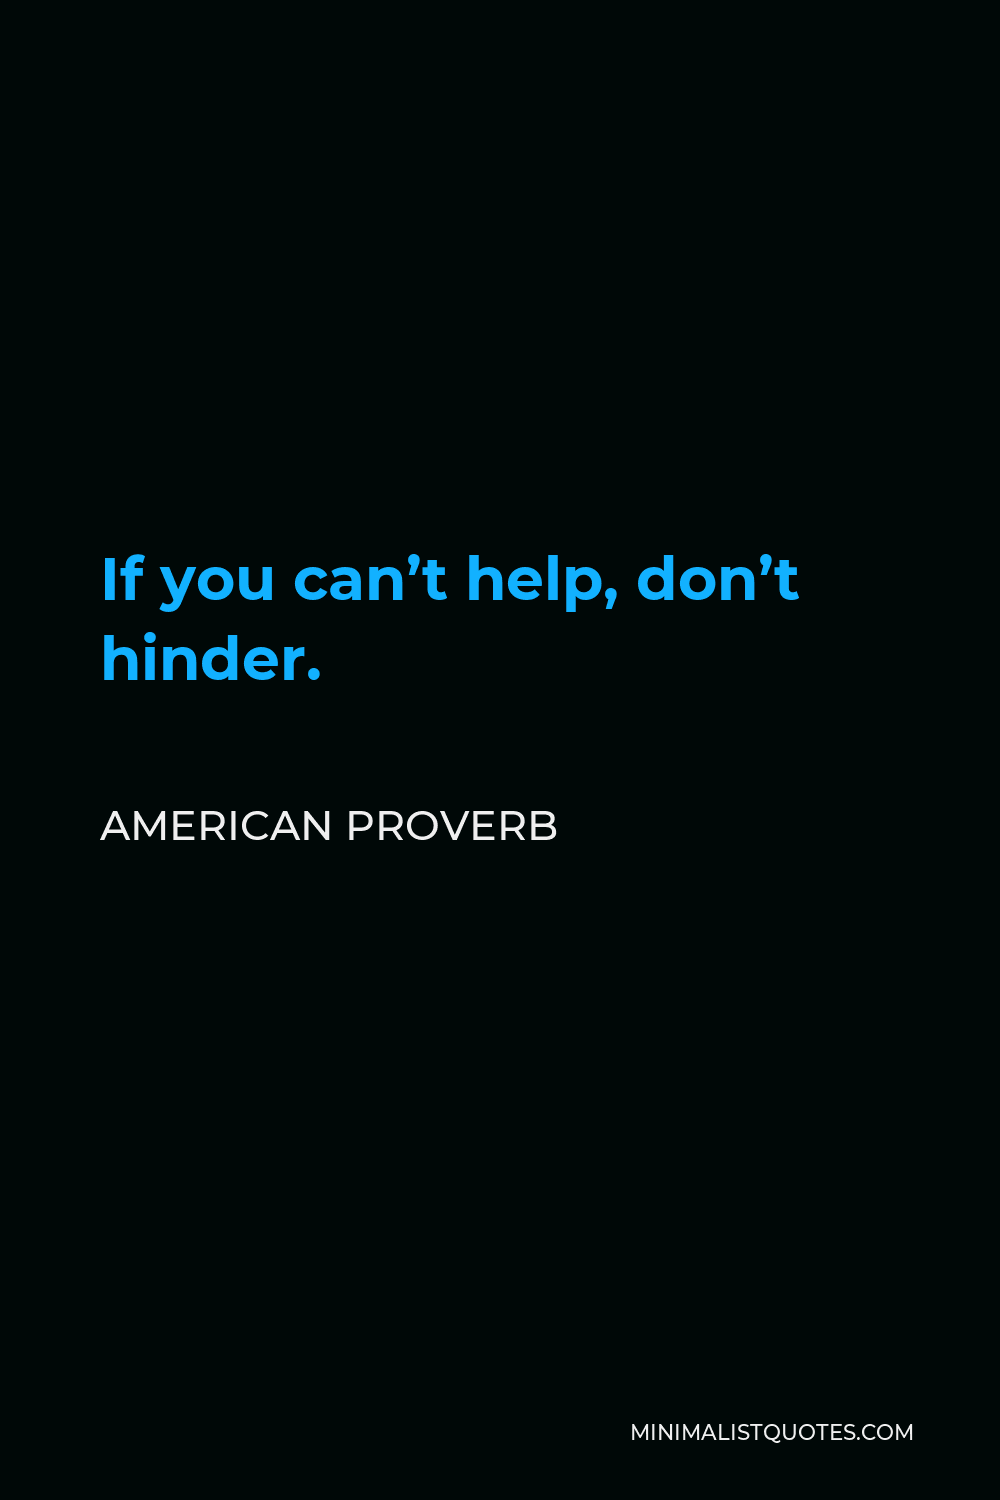 American Proverb Quote - If you can’t help, don’t hinder.